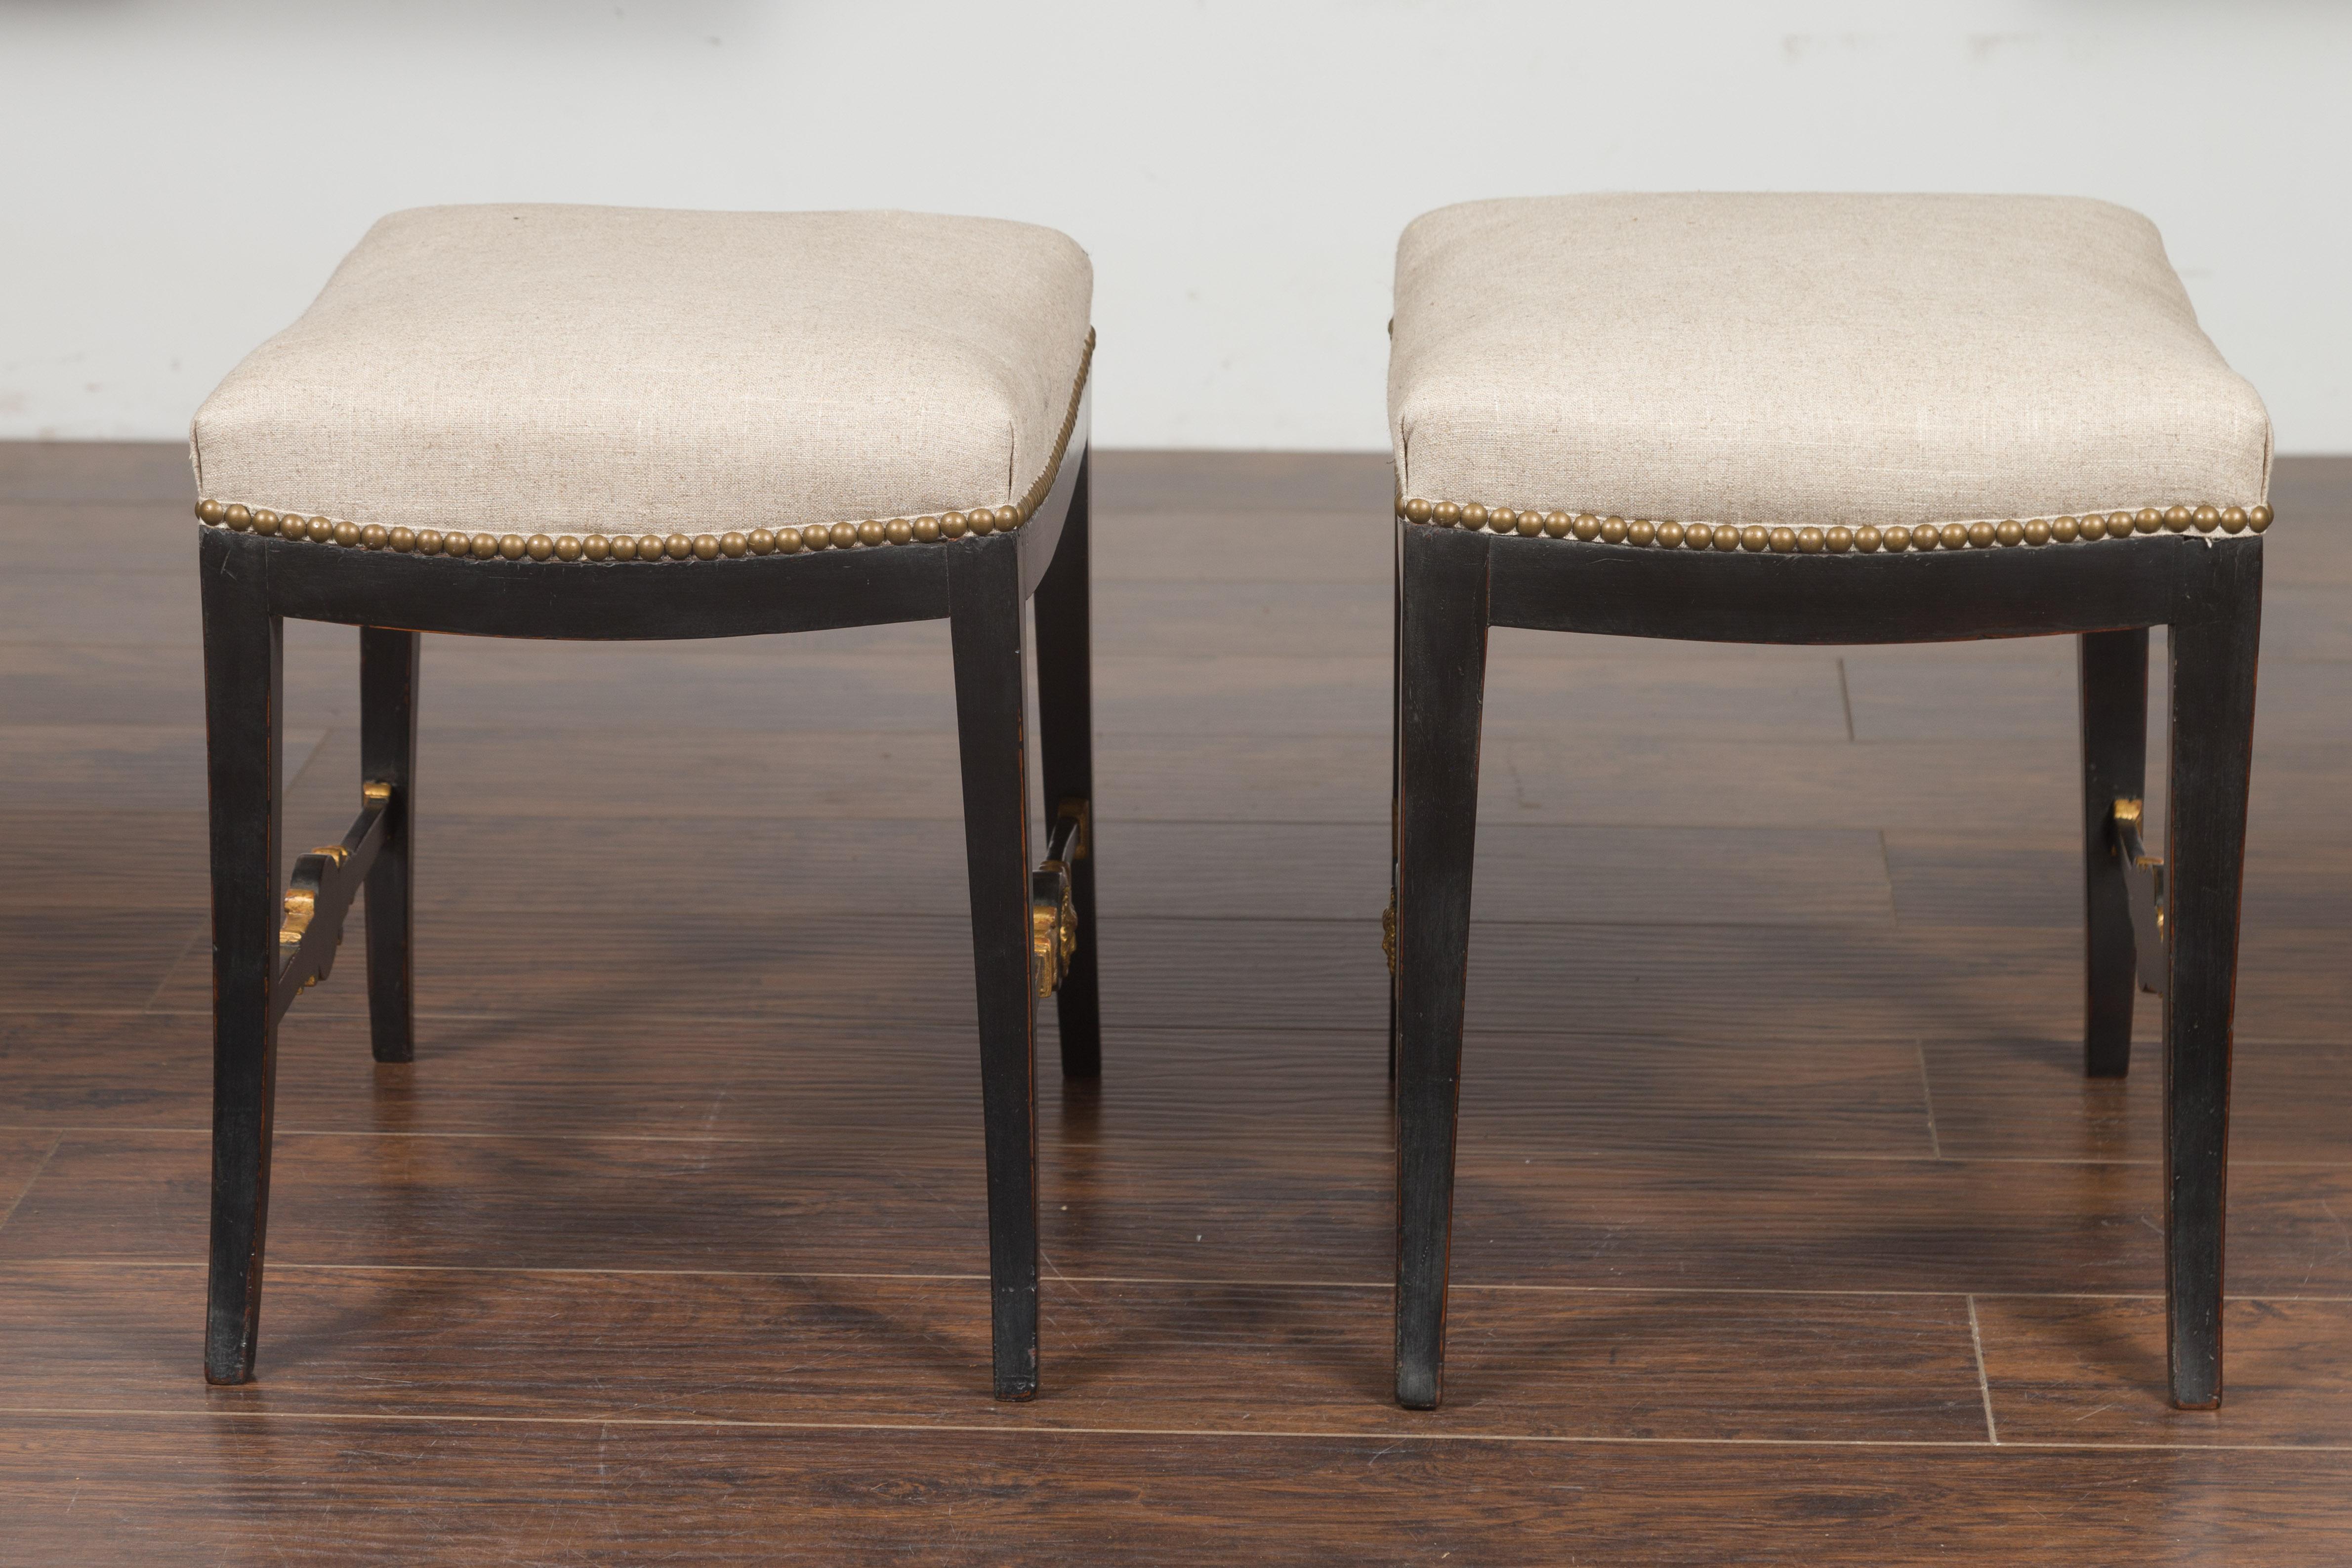 Pair of English Regency 1820s Ebonized and Gilt Stools with New Upholstery For Sale 8